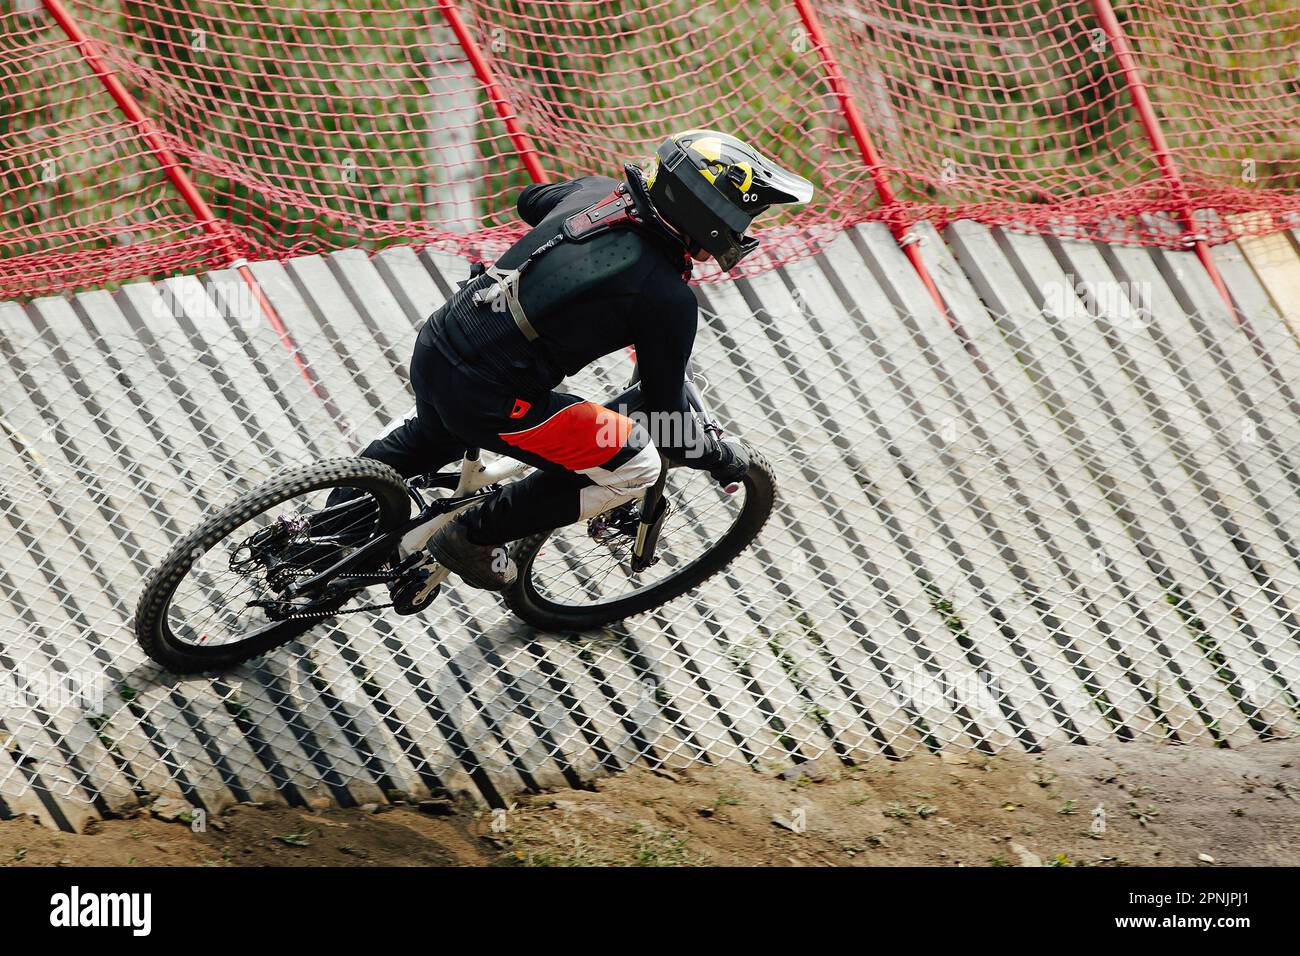 male rider rips turn on wood insloped corner in downhill race, summer extreme sports Stock Photo